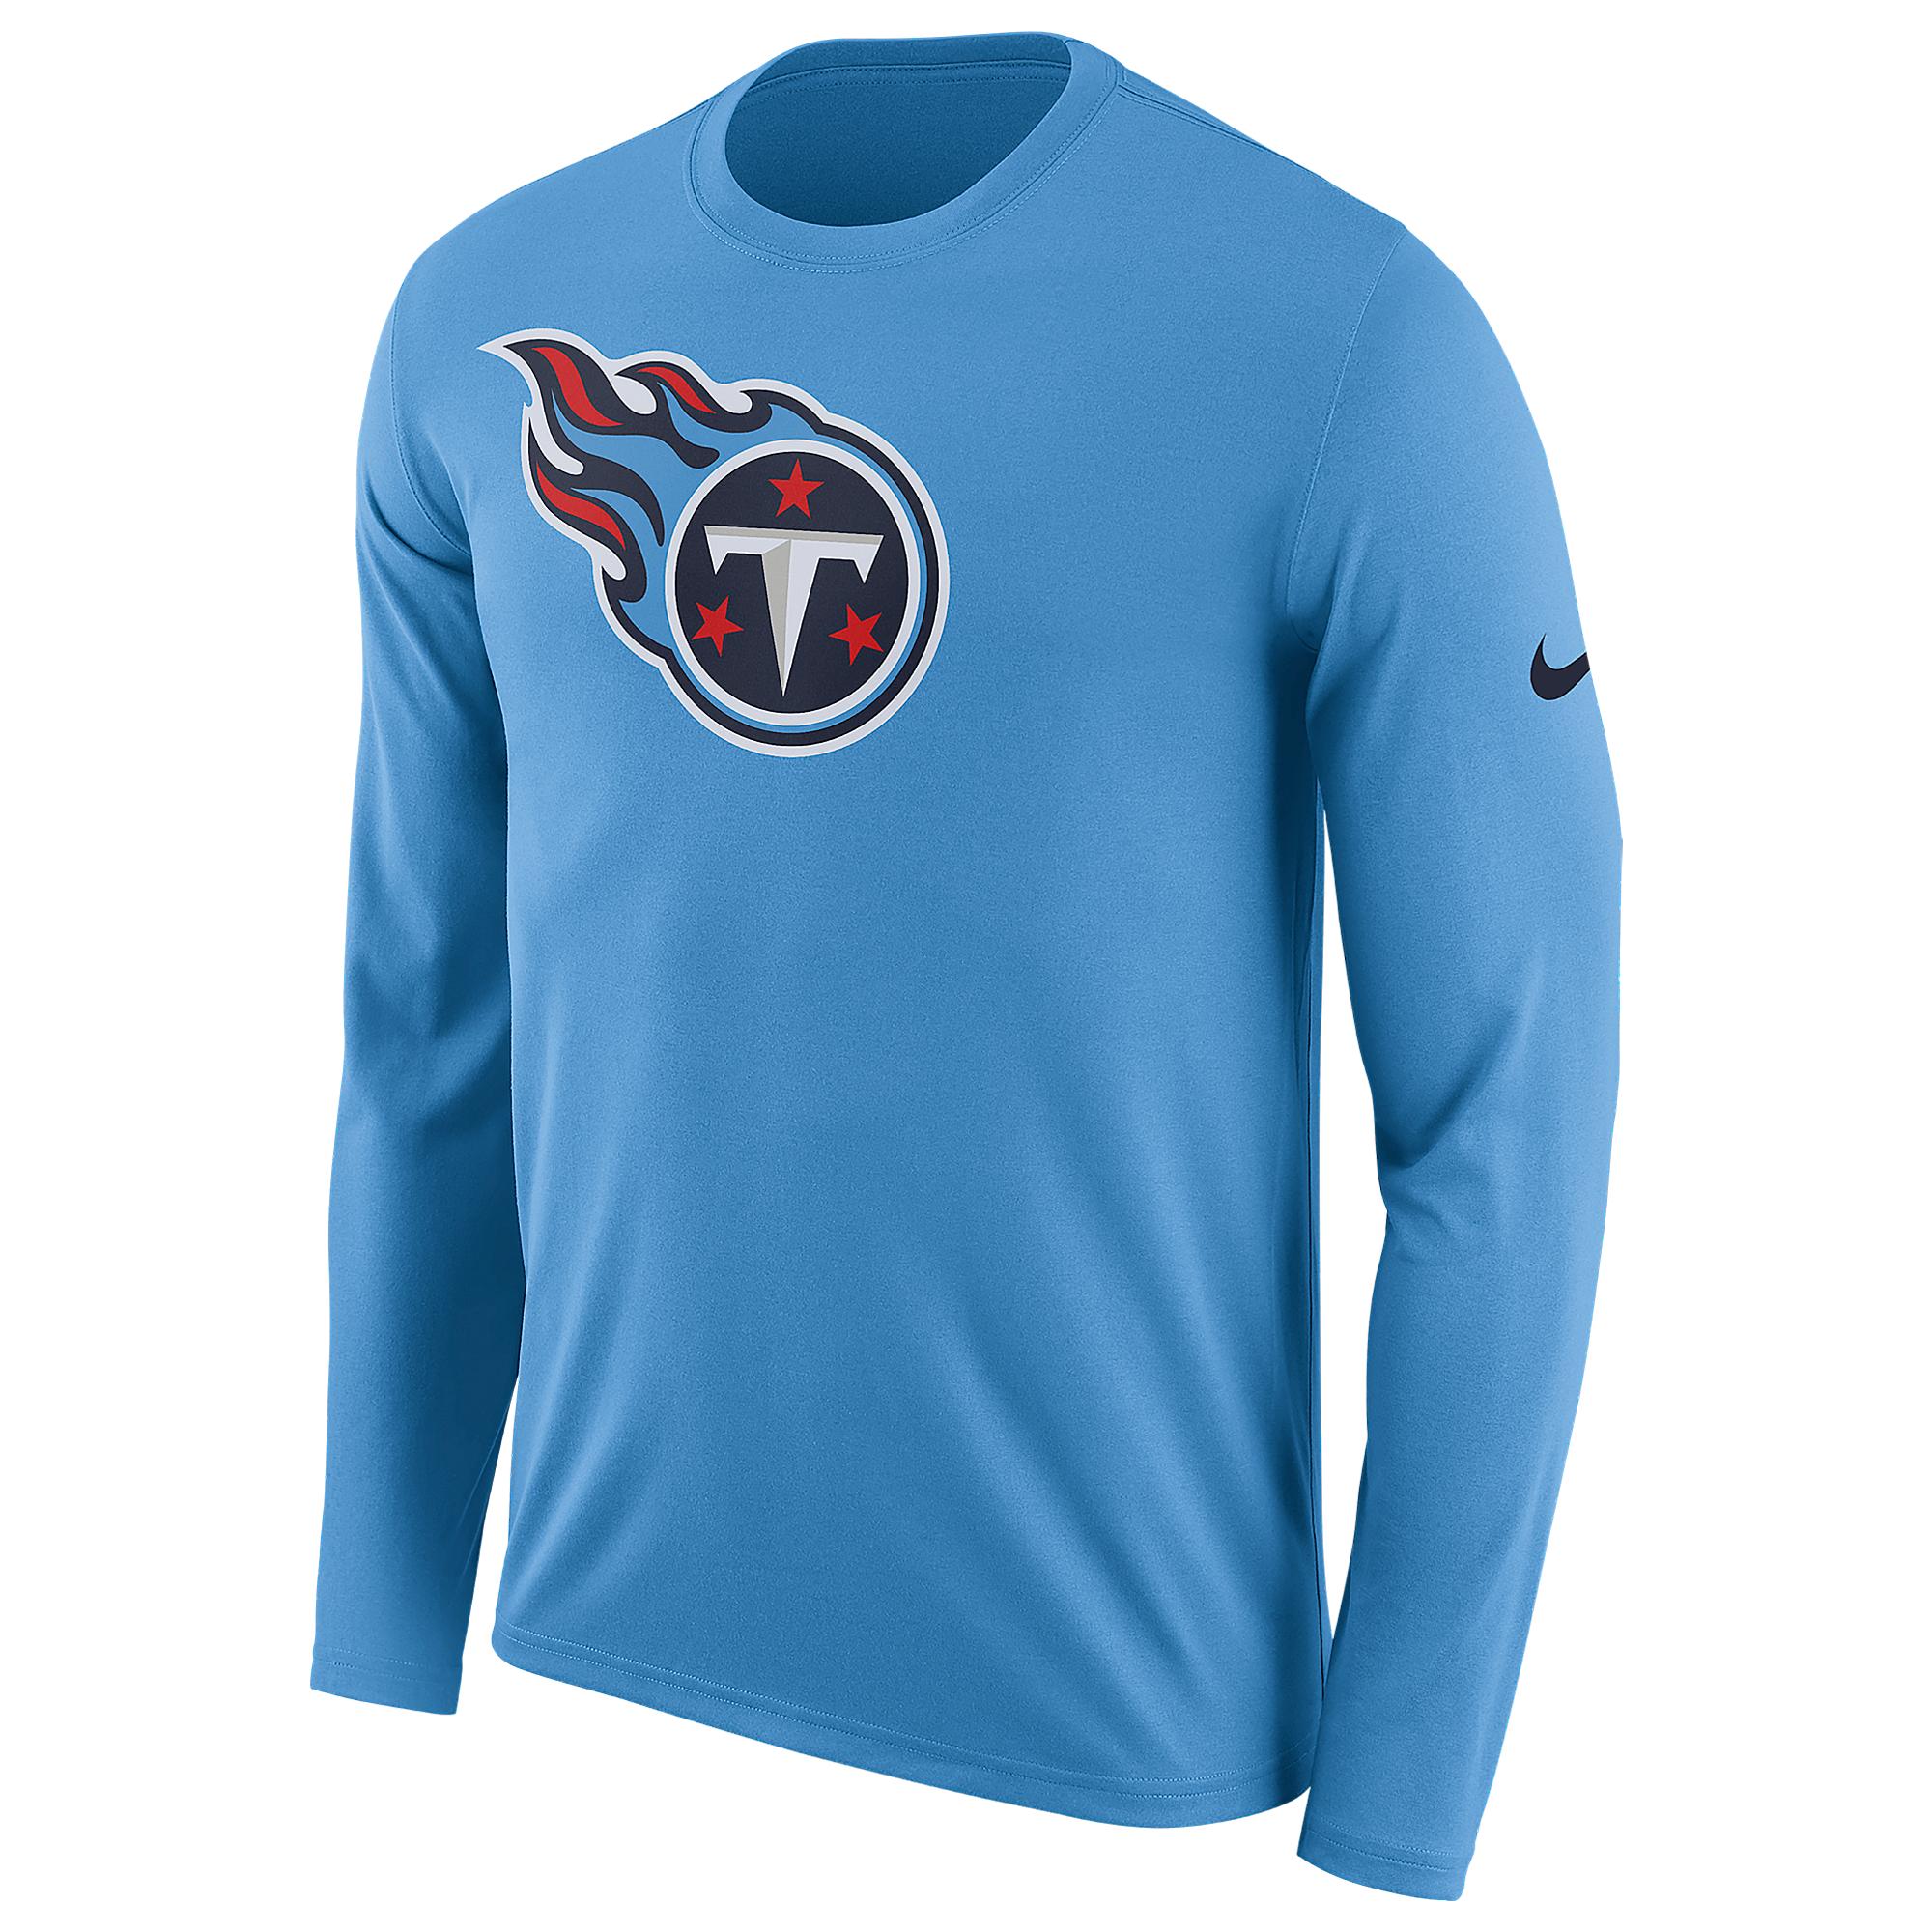 Nike Cotton Nfl Primary Logo Long Sleeve T-shirt in Blue for Men - Lyst